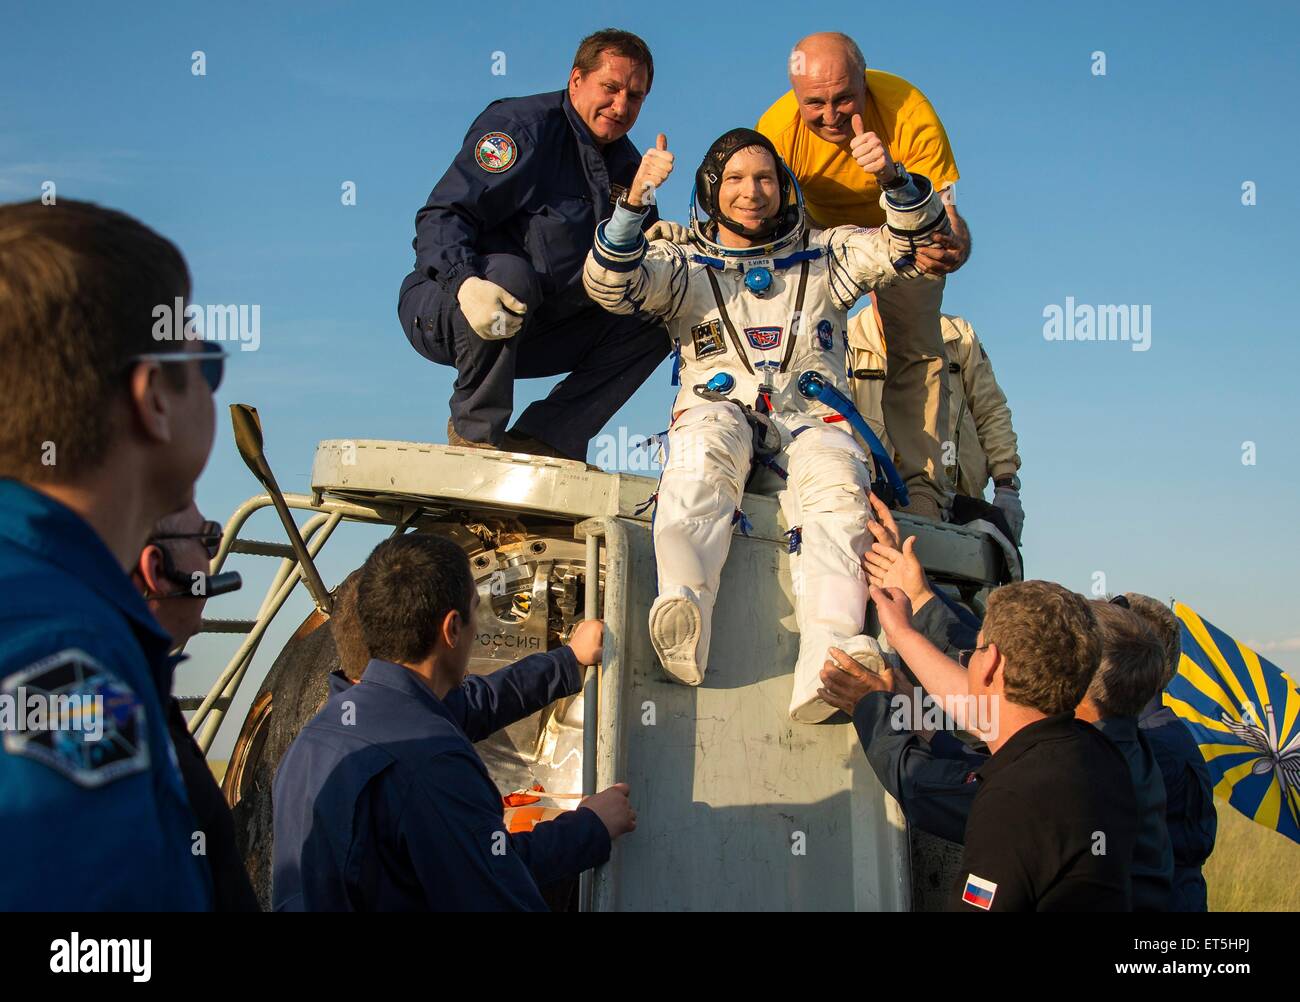 International Space Station Expedition 43 commander Terry Virts of NASA is helped out of the Soyuz TMA-15M spacecraft just minutes after he and cosmonaut Anton Shkaplerov of the Russian Federal Space Agency and Italian astronaut Samantha Cristoforetti from European Space Agency landed in a remote area June 11, 2015 near Zhezkazgan, Kazakhstan. The crew is returning after more than six months onboard the International Space Station. Stock Photo